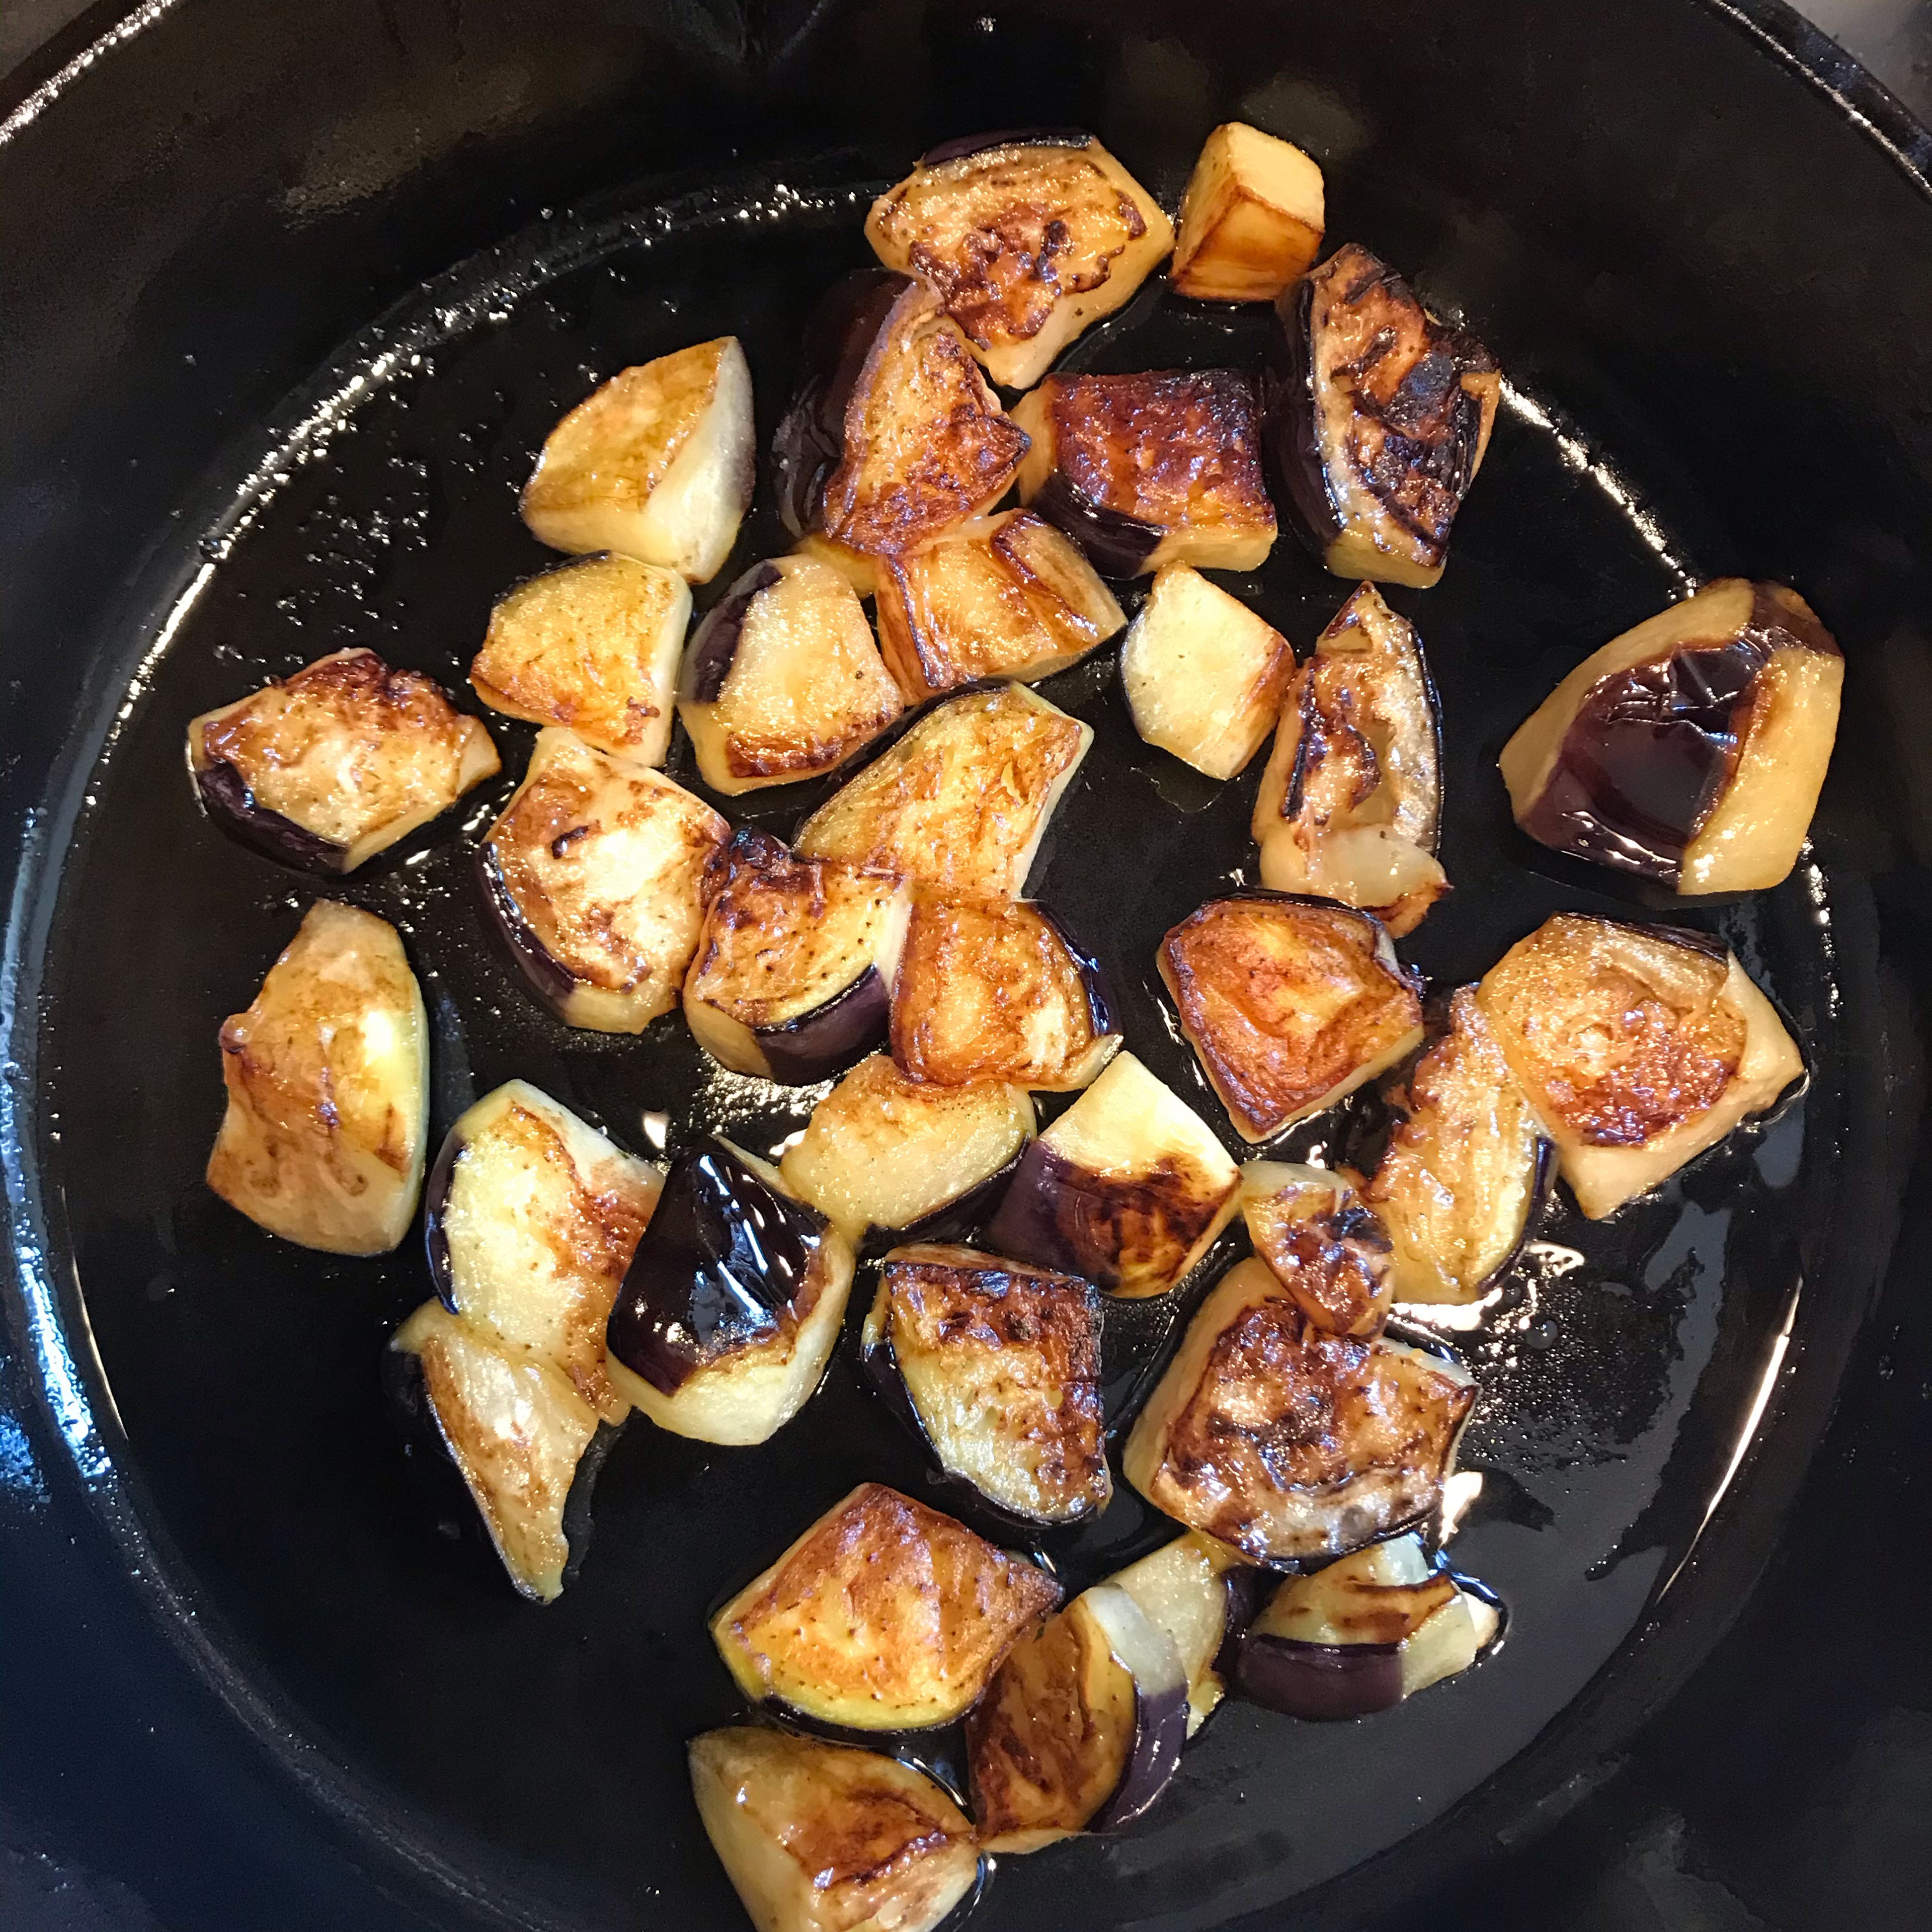 Chop the aubergine and fry them in the olive oil until golden colour